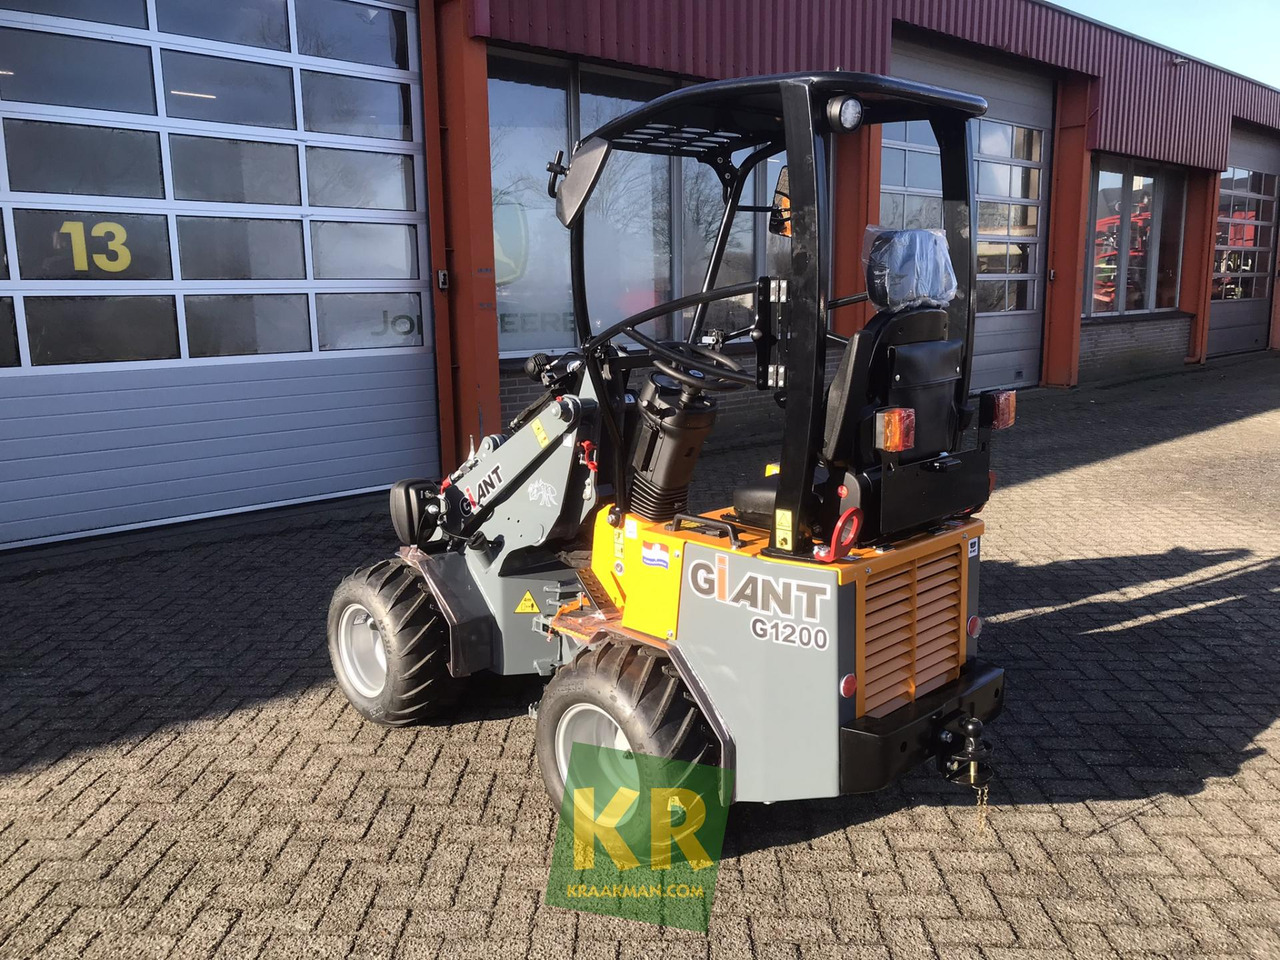 Compact loader G1200 Giant